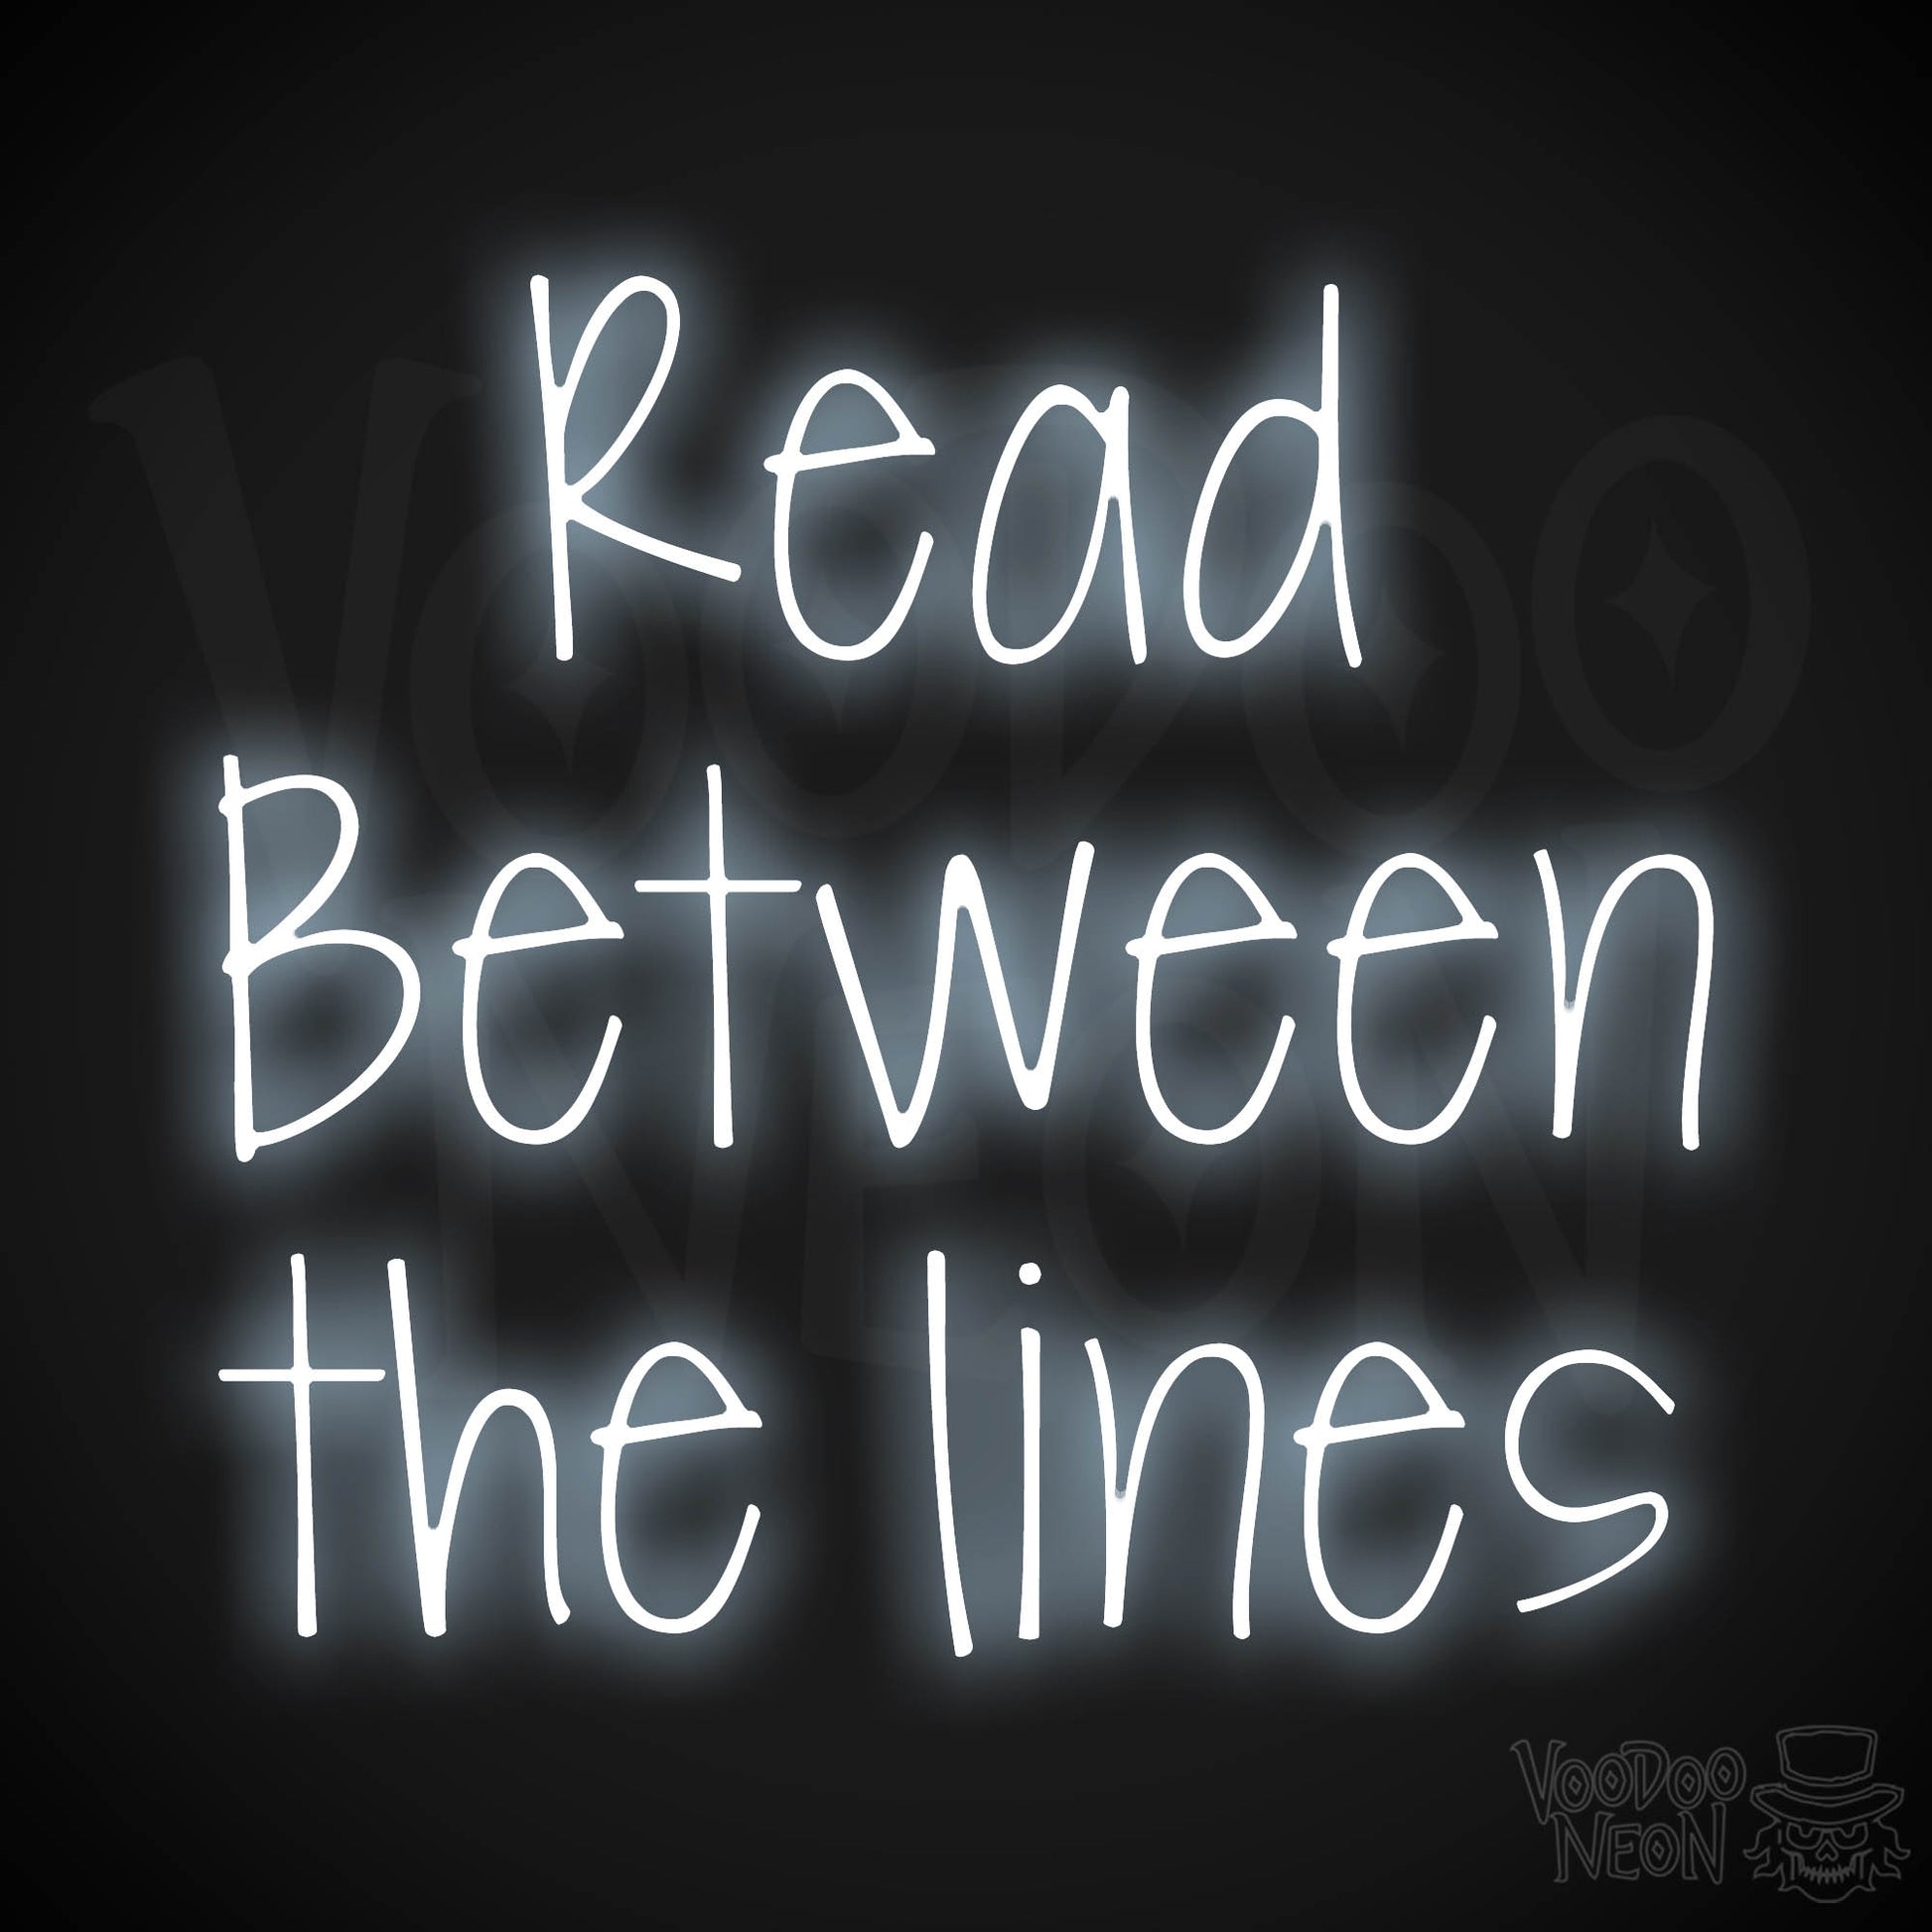 Read Between The Lines LED Neon - Cool White